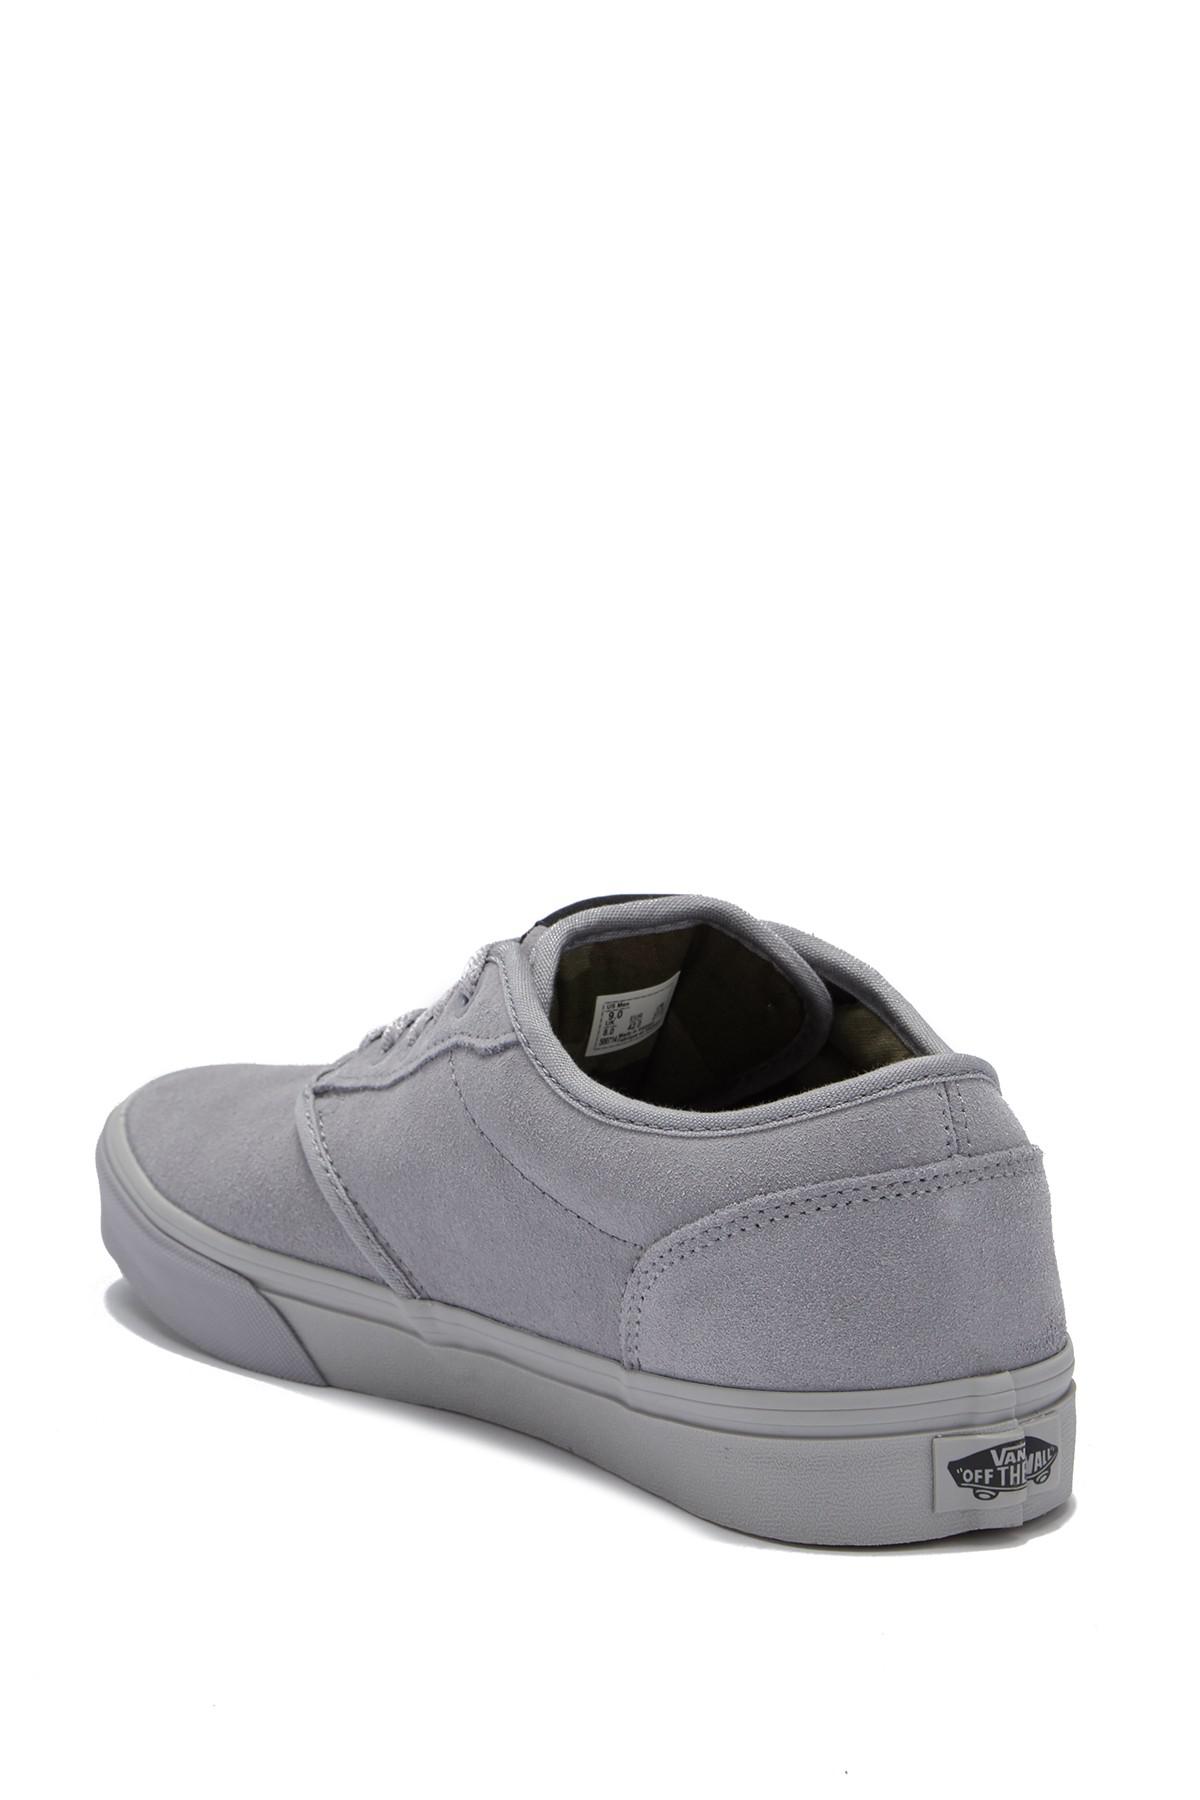 Vans Canvas Atwood Sneaker in Gray for Men | Lyst